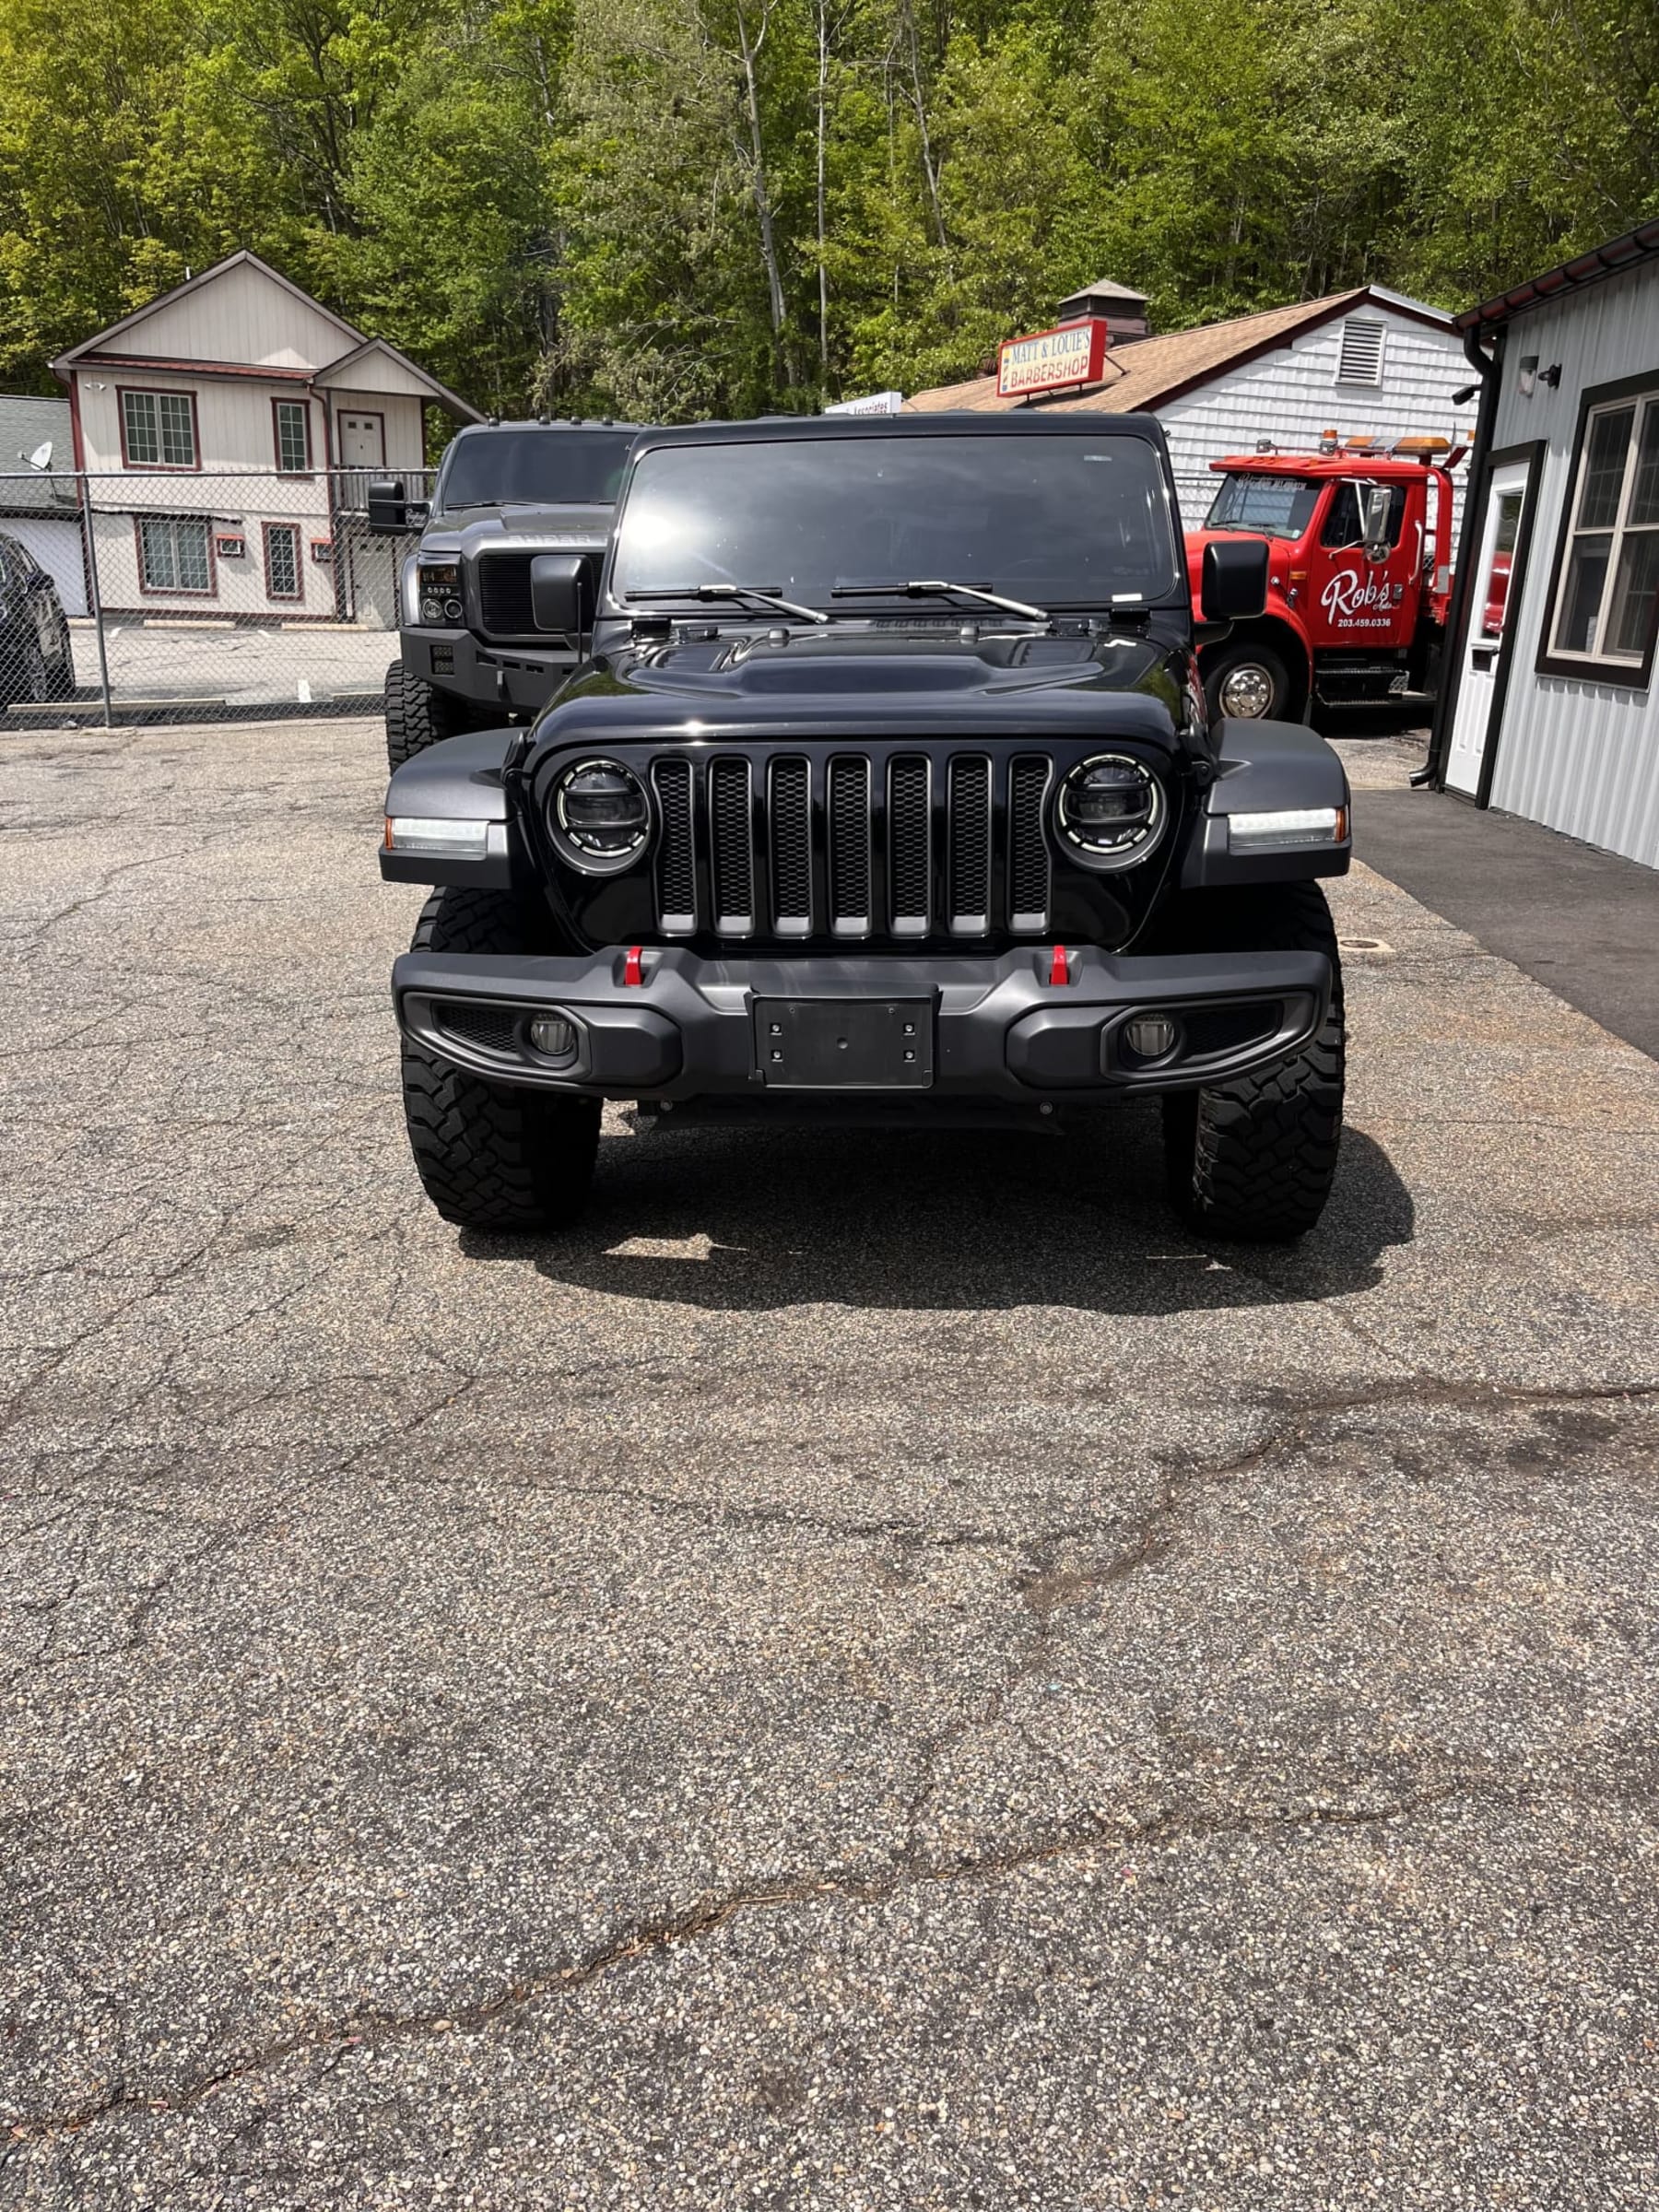 New Arrival!! 2020 Jeep Wrangler Unlimited Rubicon!! Only 26,800 miles! Loaded with heated seats and steering wheel, navigation, remote start, custom stitched leather seats from the factory, freedom hardtop, backup camera and much much more! Don’t miss this one! $47,900!